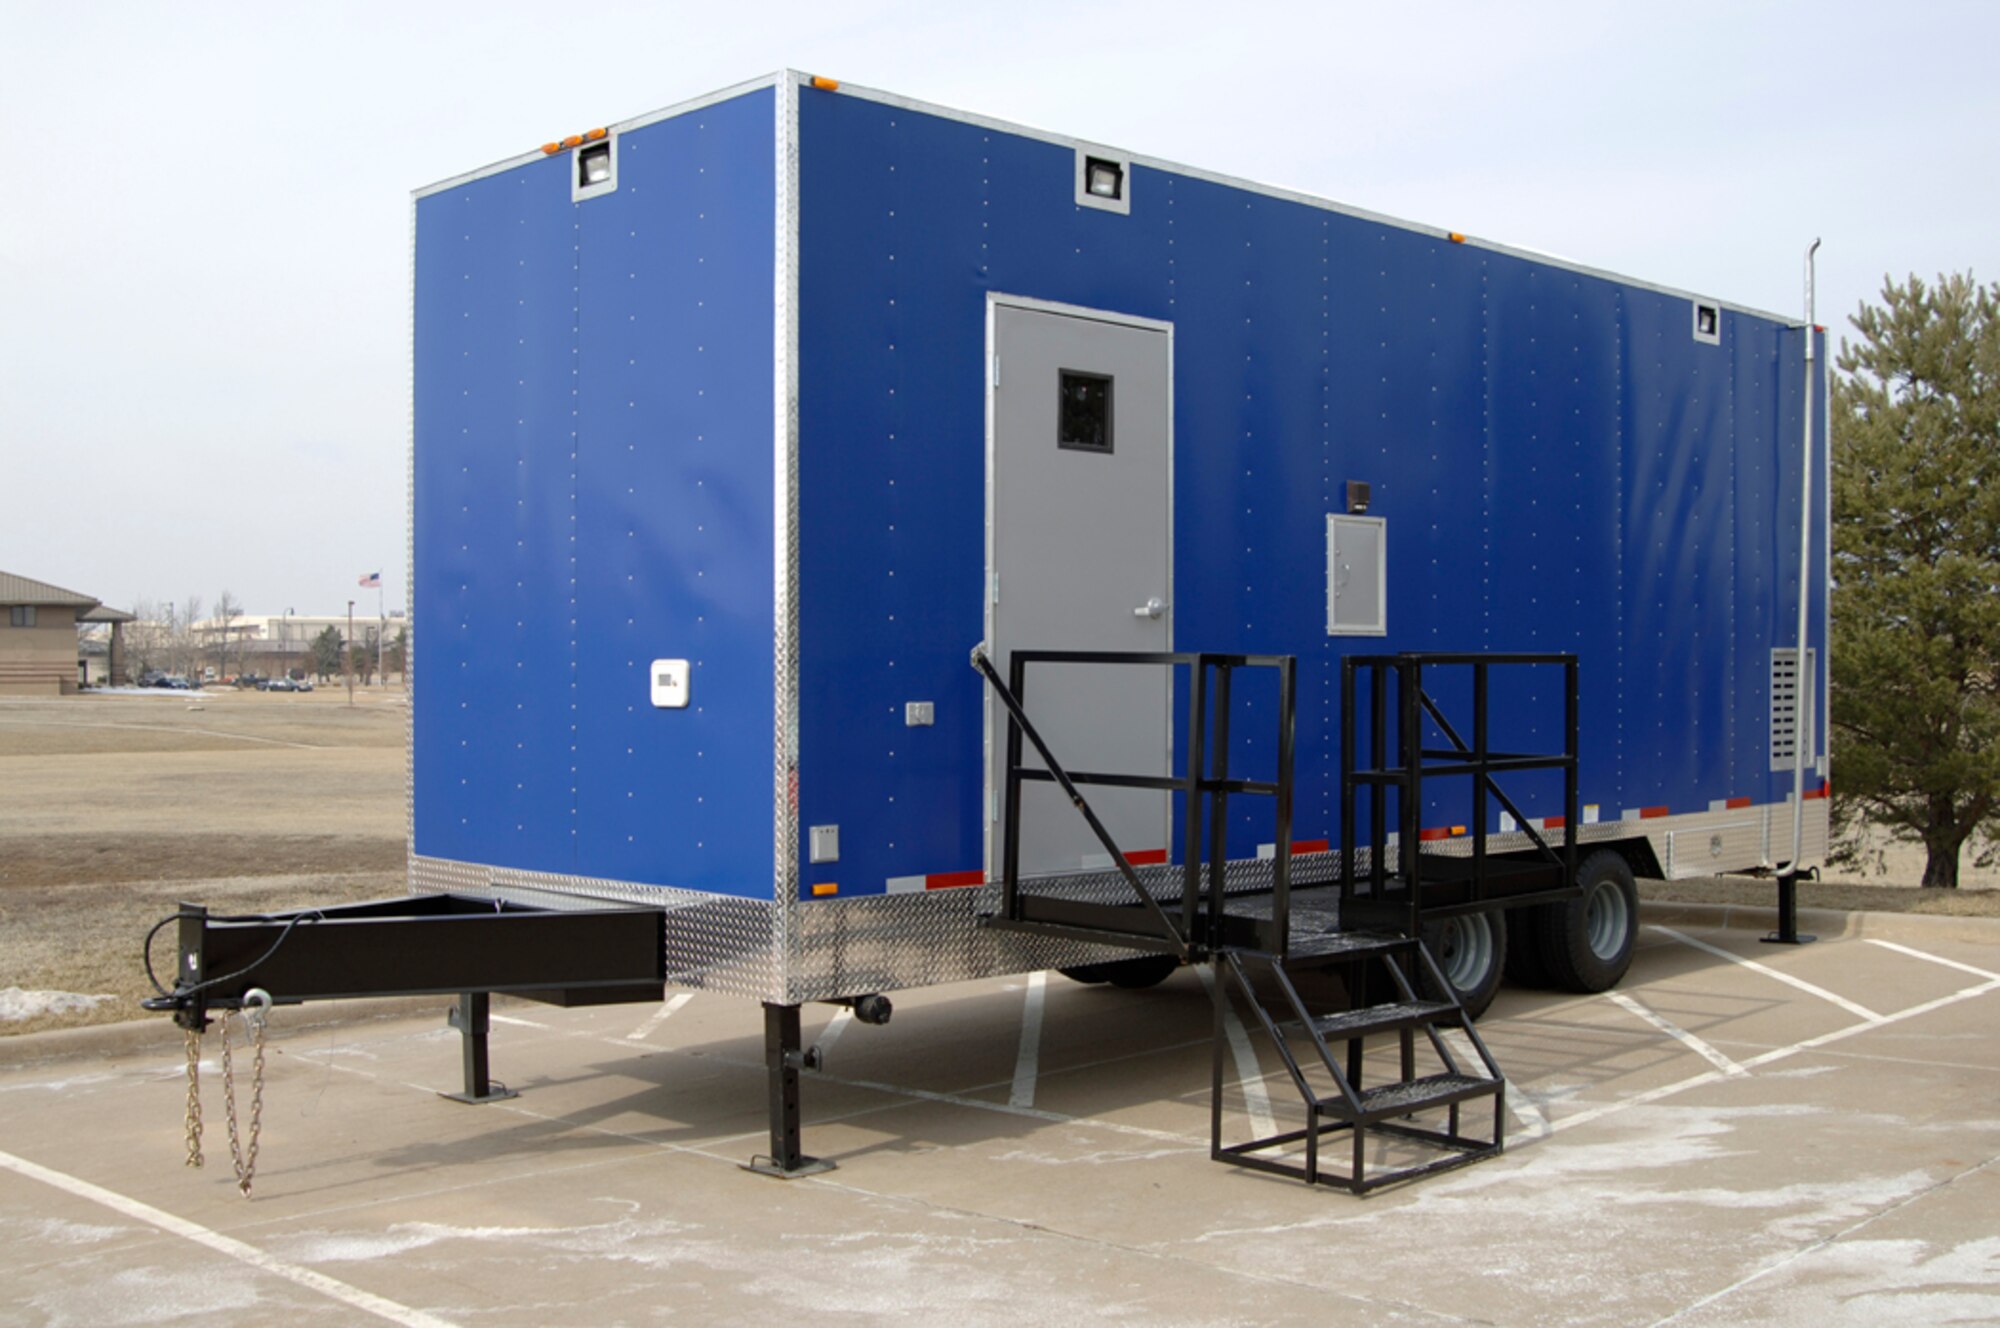 The 22nd Air Refueling Wing held a ceremony here Feb. 6, marking the first delivery in the Air Force of a Laboratory Response Team trailer. The trailer is equipped with a Joint Biological Agent Identification and Diagnostic System, or JBAIDS for short, providing rapid biological agent analysis in any emergency situation on the installation. (Air Force photo by Senior Airman Jamie Train, 22nd Communications Squadron)
